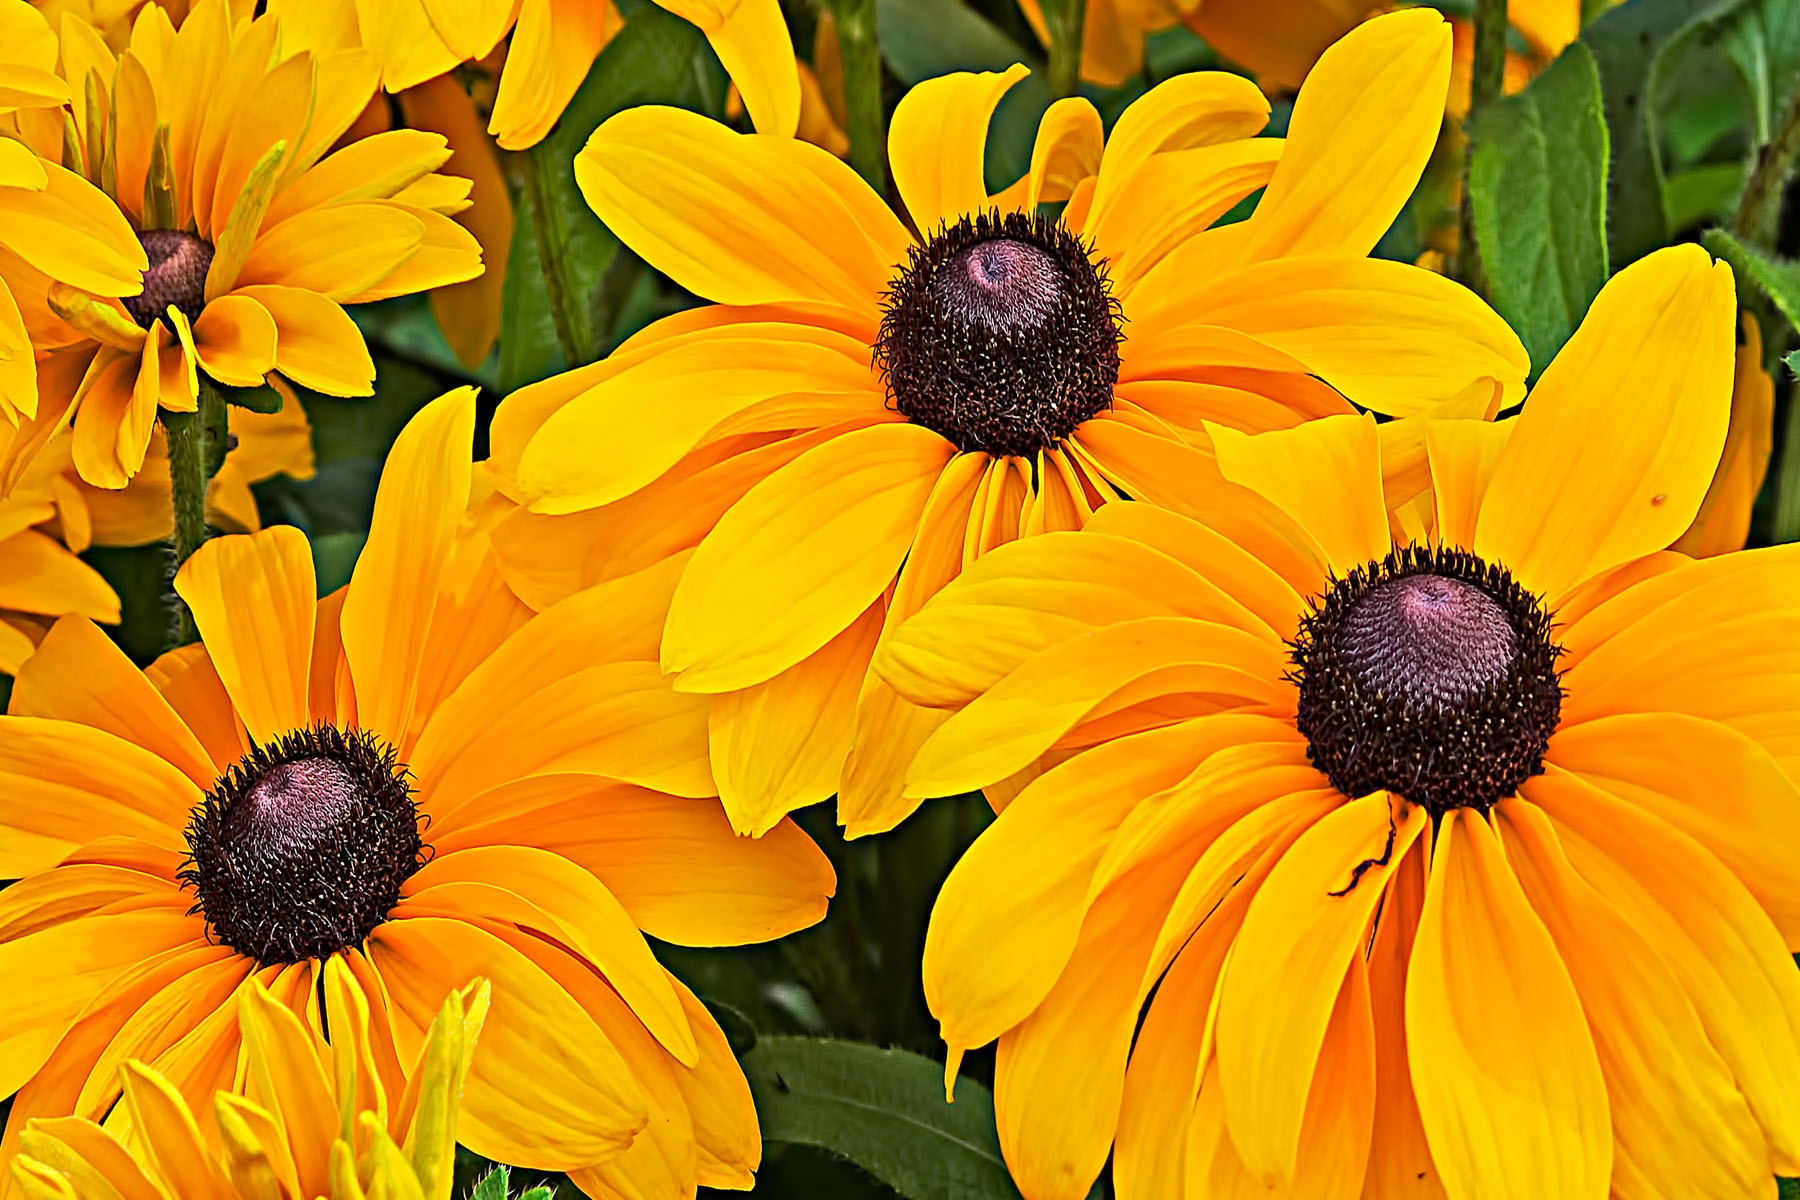 YELLOW - Yellow daisys, yellow flowers, yellow black-eyed susans... no matter what you call them, they are yellow.